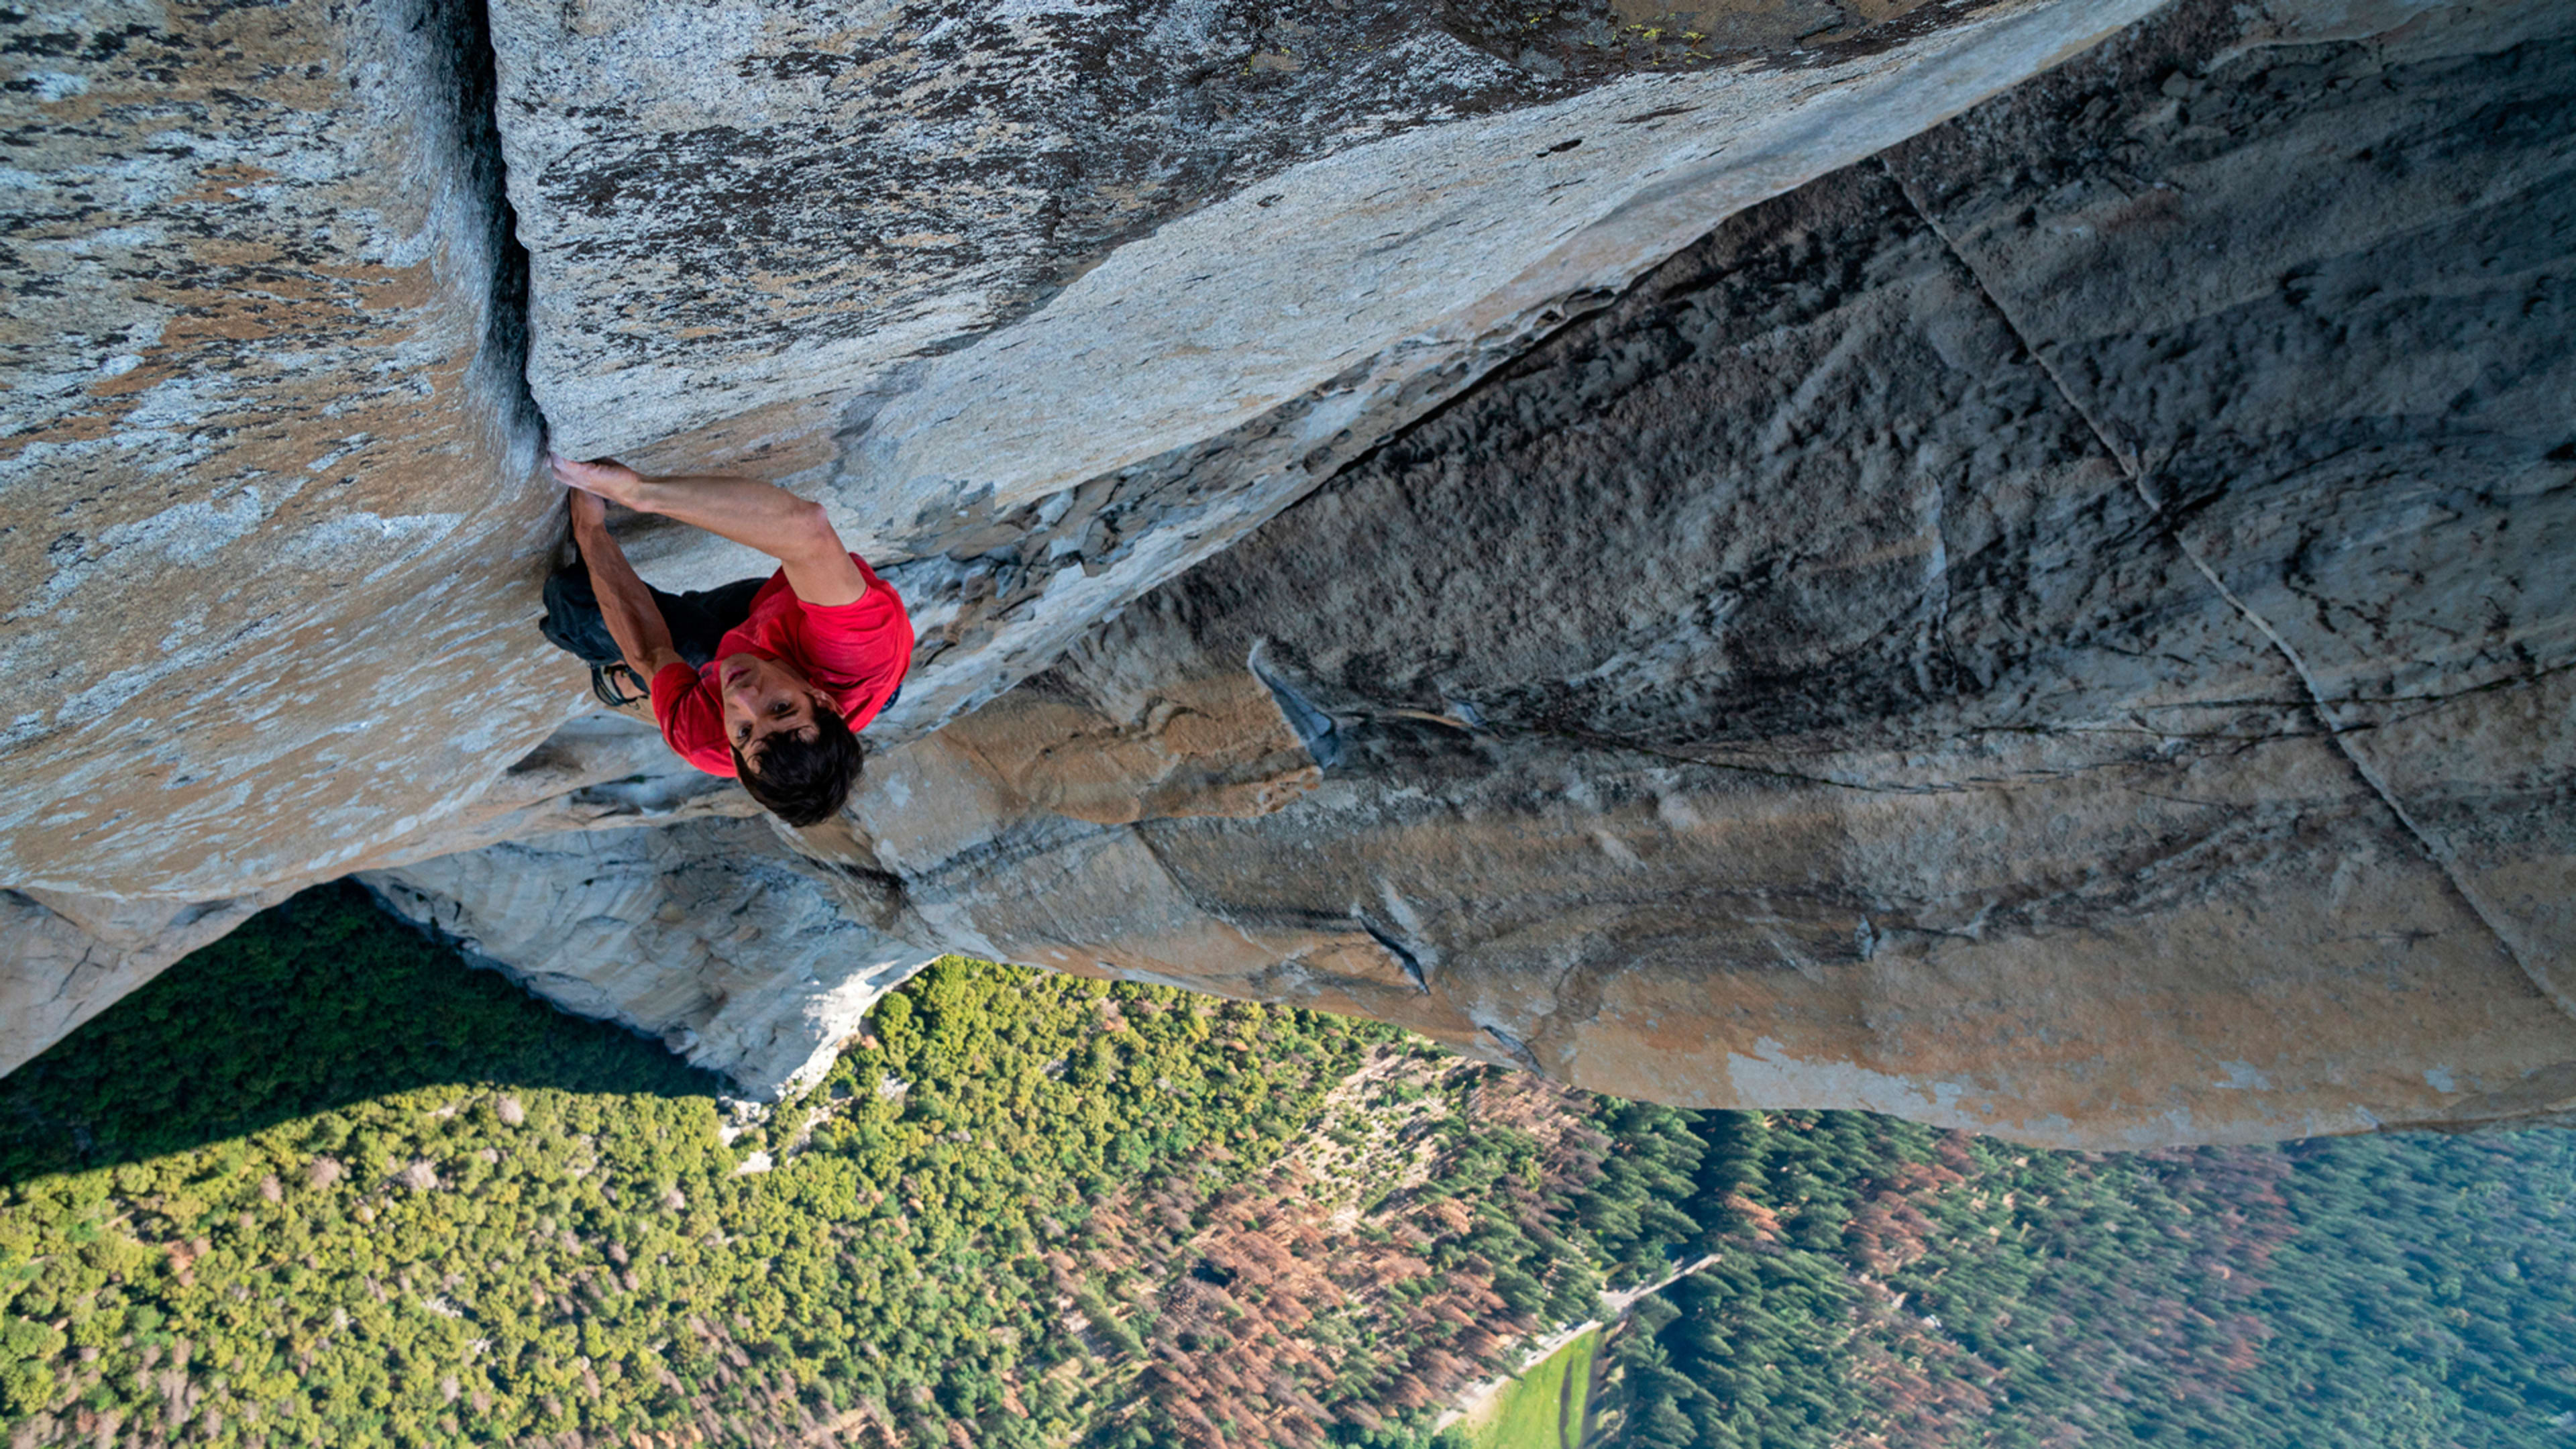 “Free Solo” puts you on the most death-defying rock climb ever made